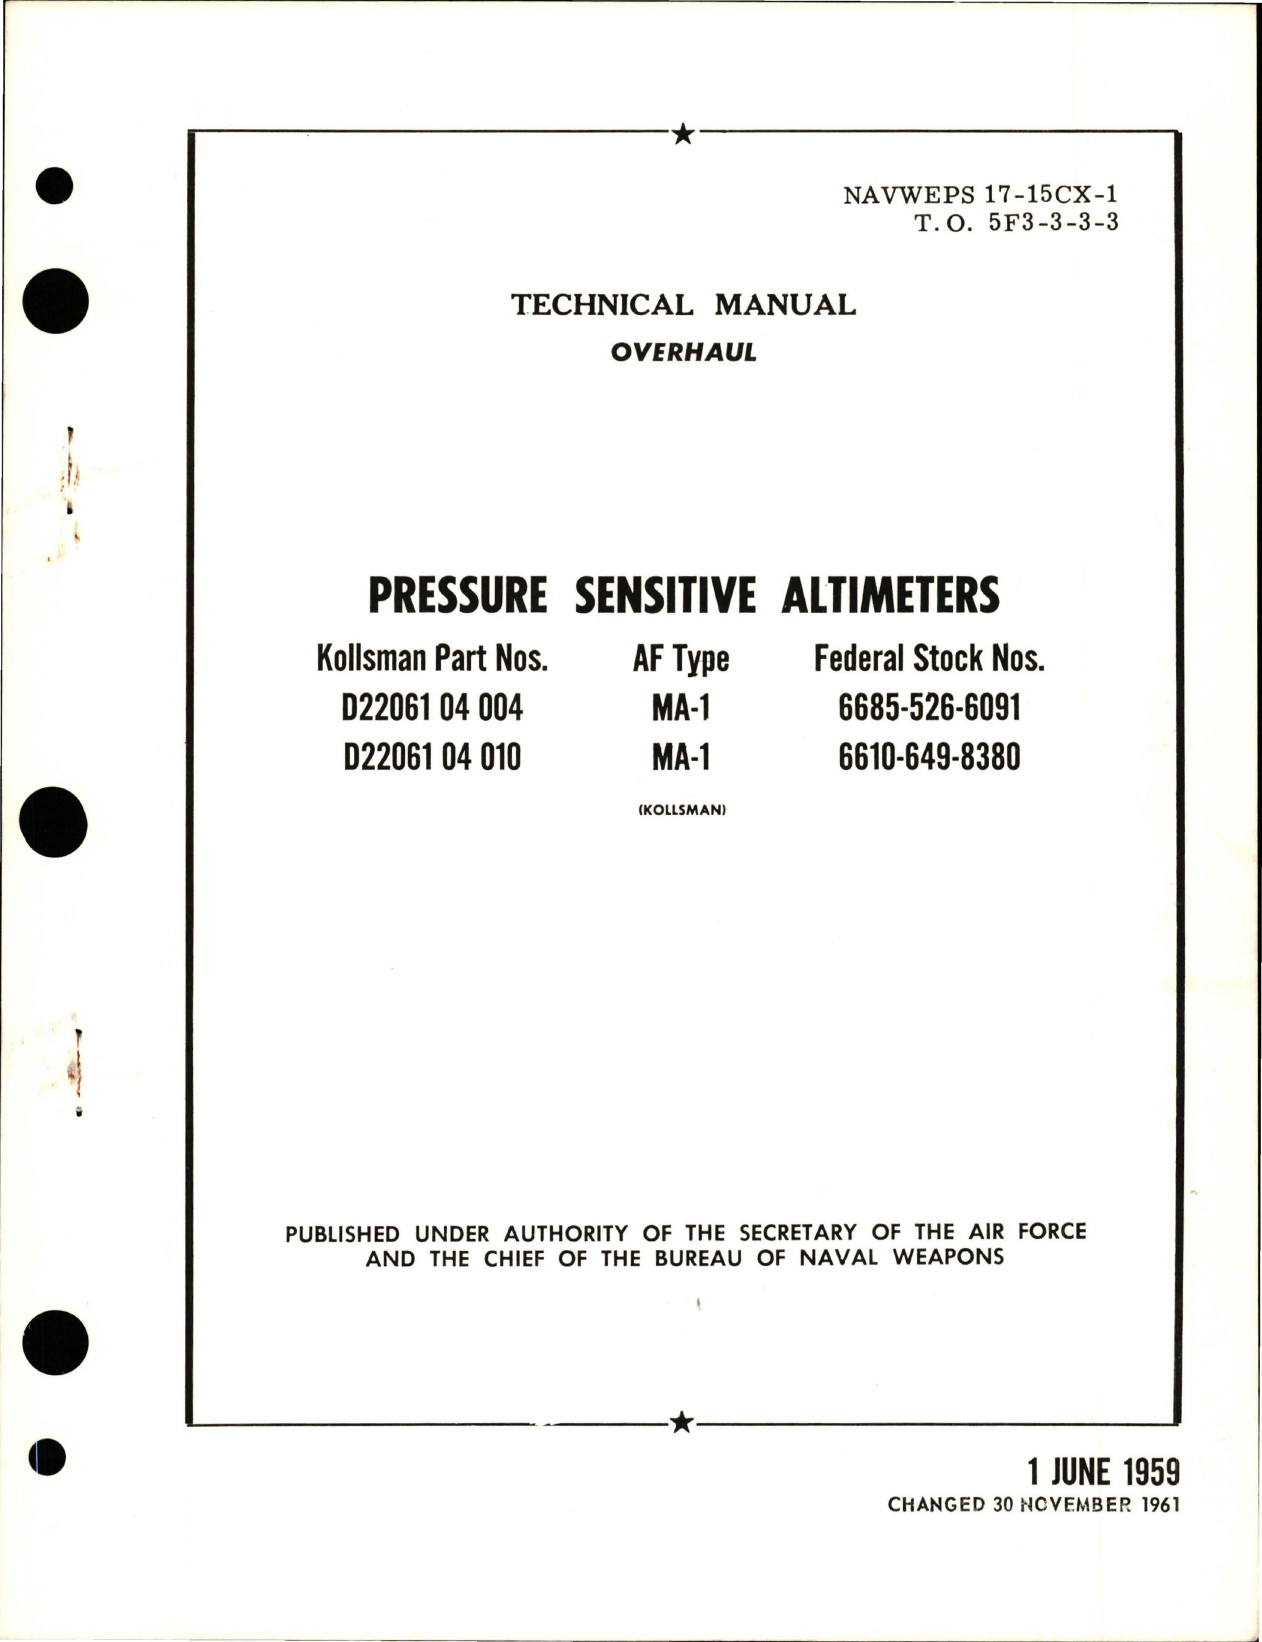 Sample page 1 from AirCorps Library document: Overhaul for Pressure Sensitive Altimeters - Parts D22061 04 004 and D22061 04 010